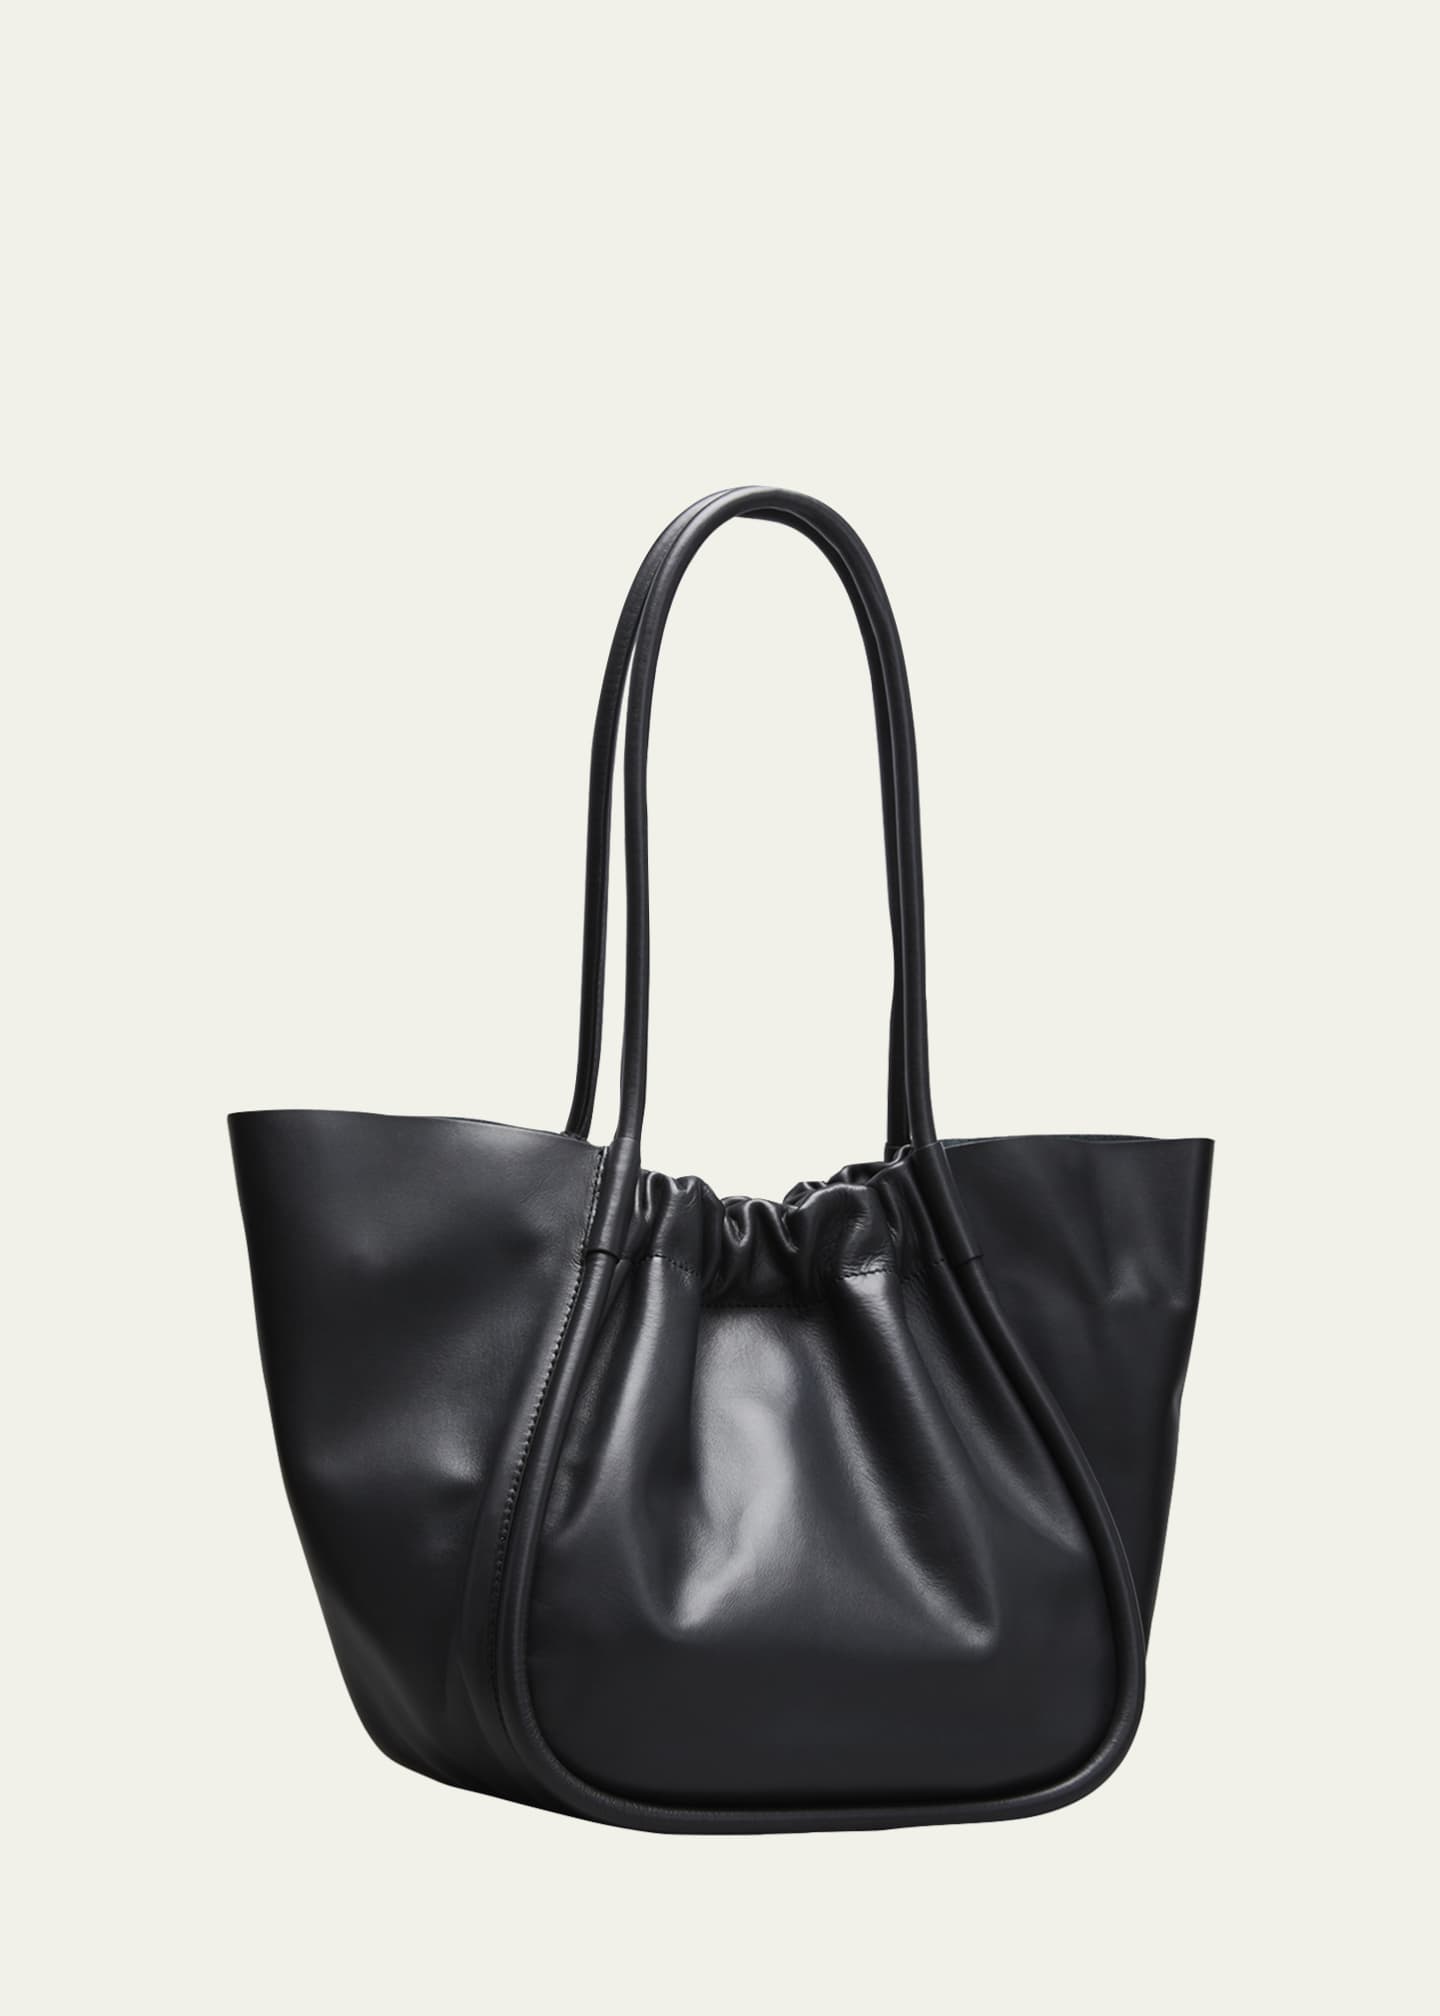 Proenza Schouler Large Ruched Smooth Leather Tote Bag - Bergdorf Goodman